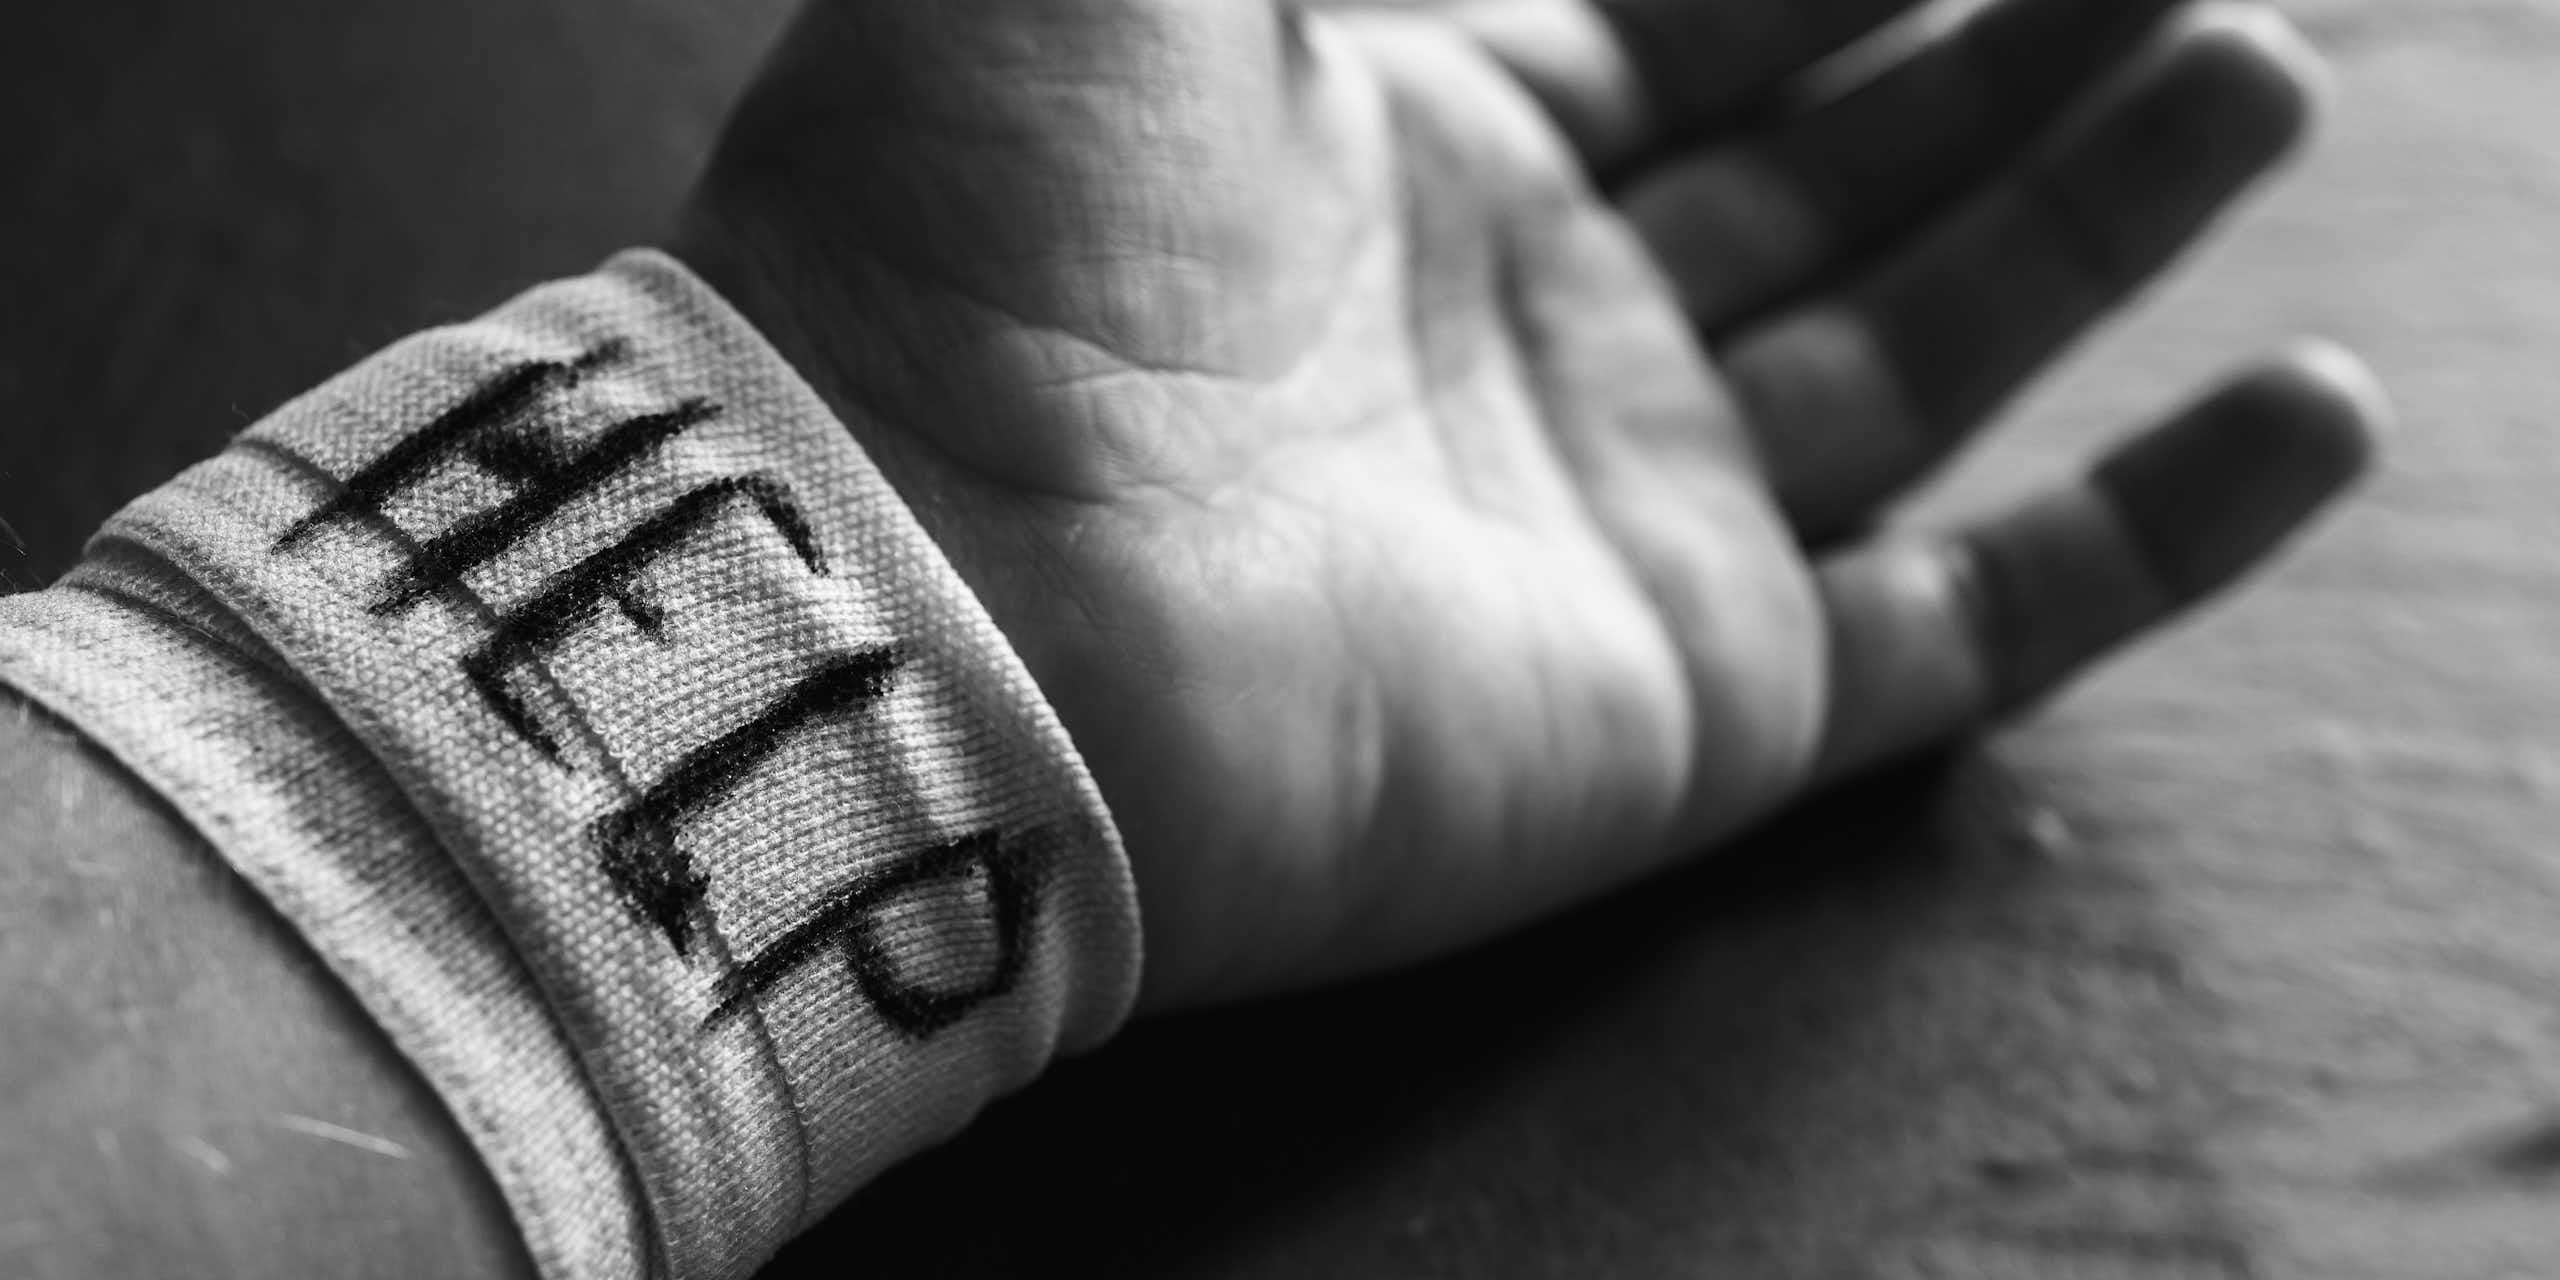 A hand with 'HELP' written on its bandaged wrist